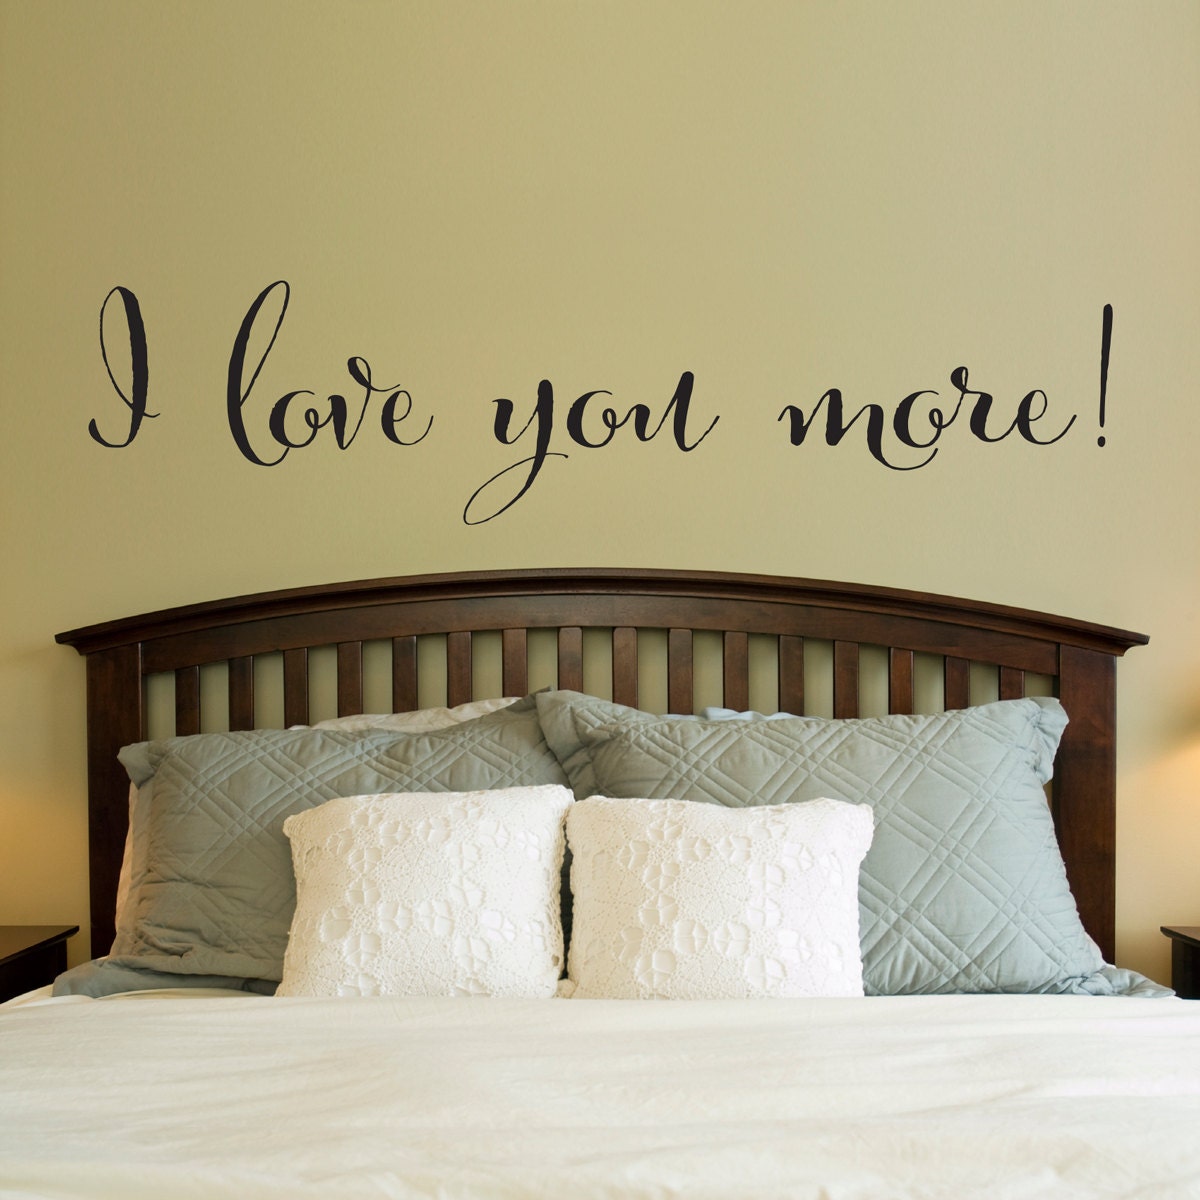 I love you more Decal | Love Quote Vinyl | Bedroom Wall Decor